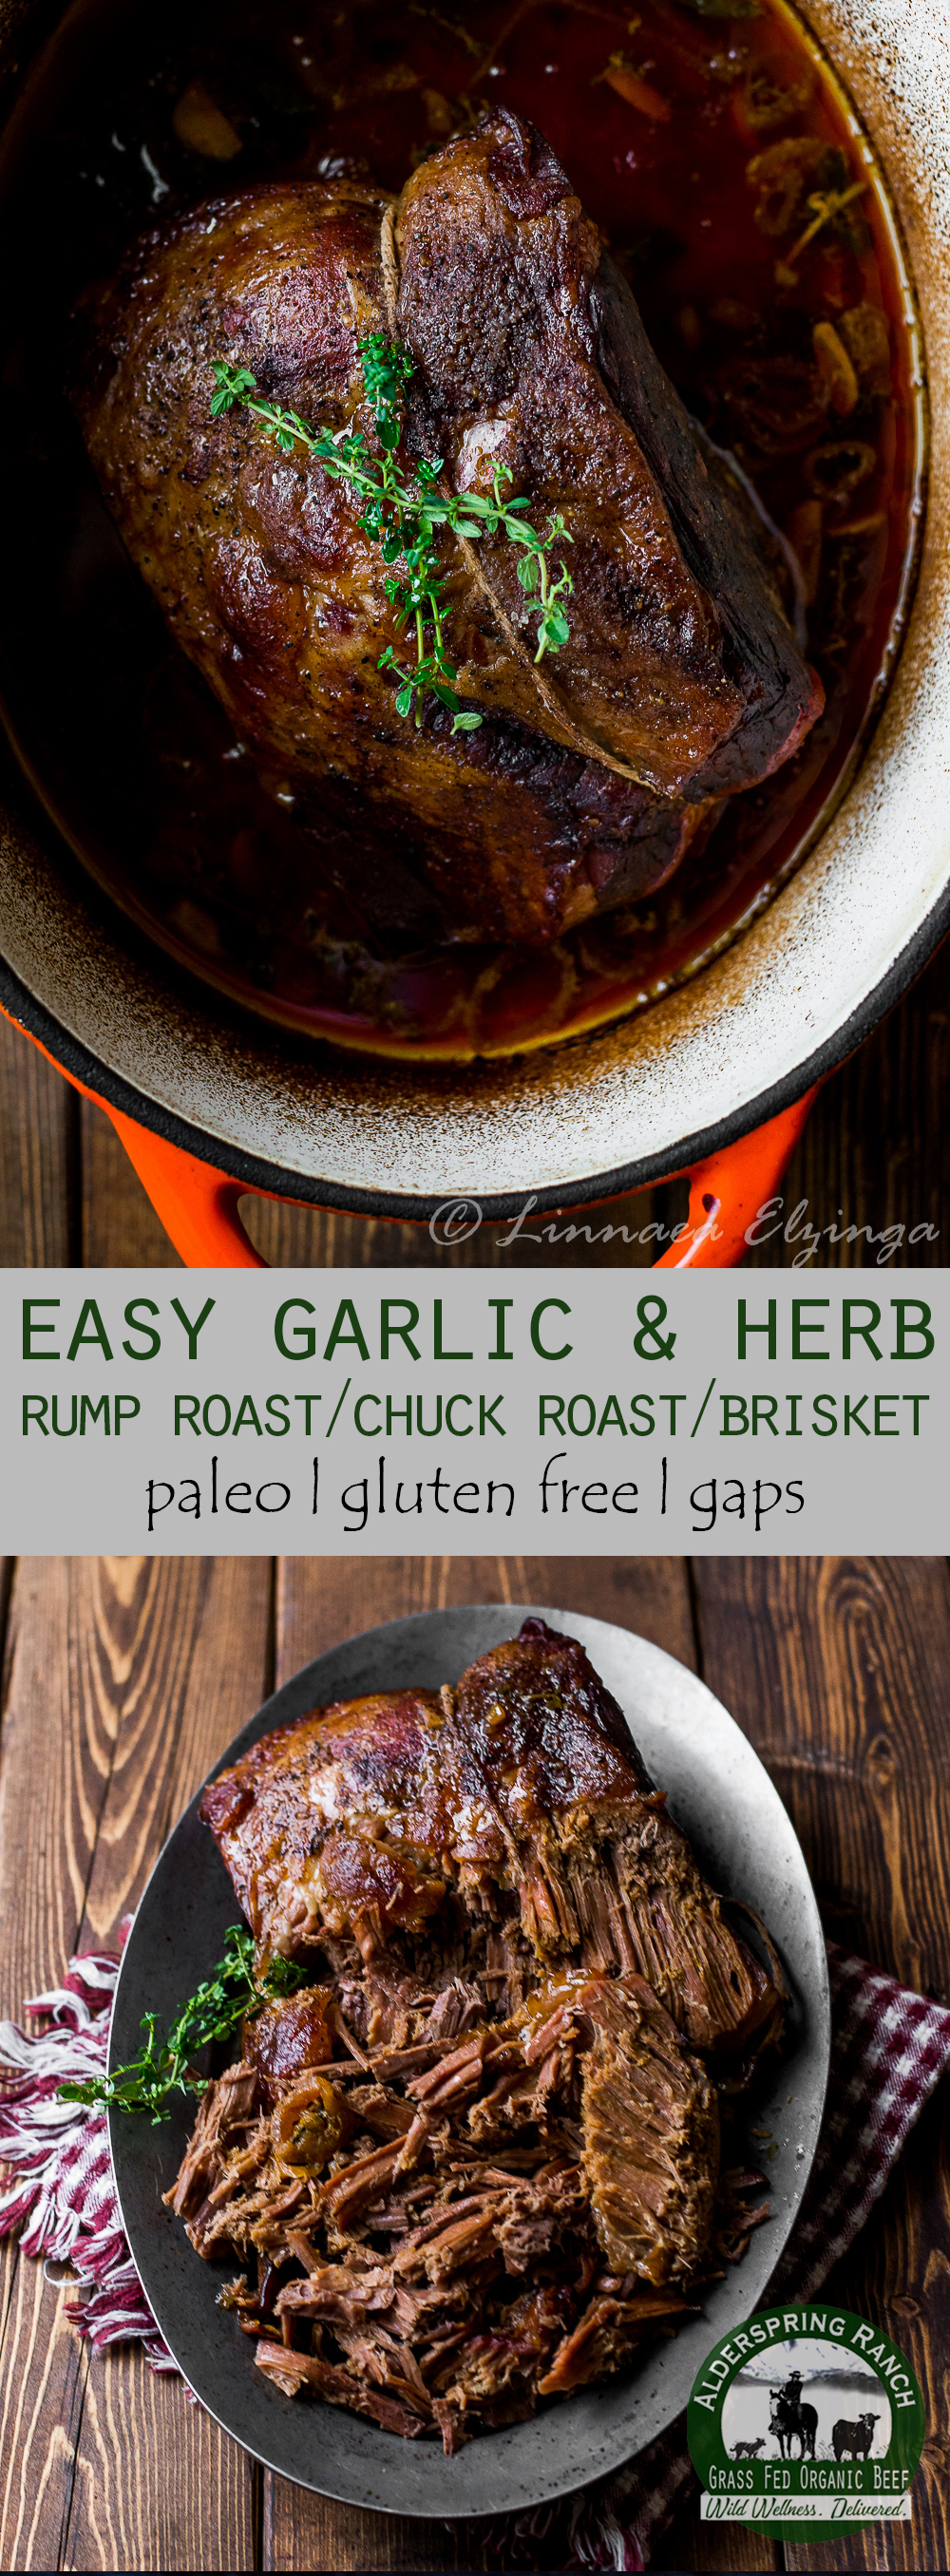 Cooking rump roast, chuck roast, or brisket? Try this easy garlic herb roast recipe that's perfect for fall! AIP, GAPs, Paleo, Gluten Free.